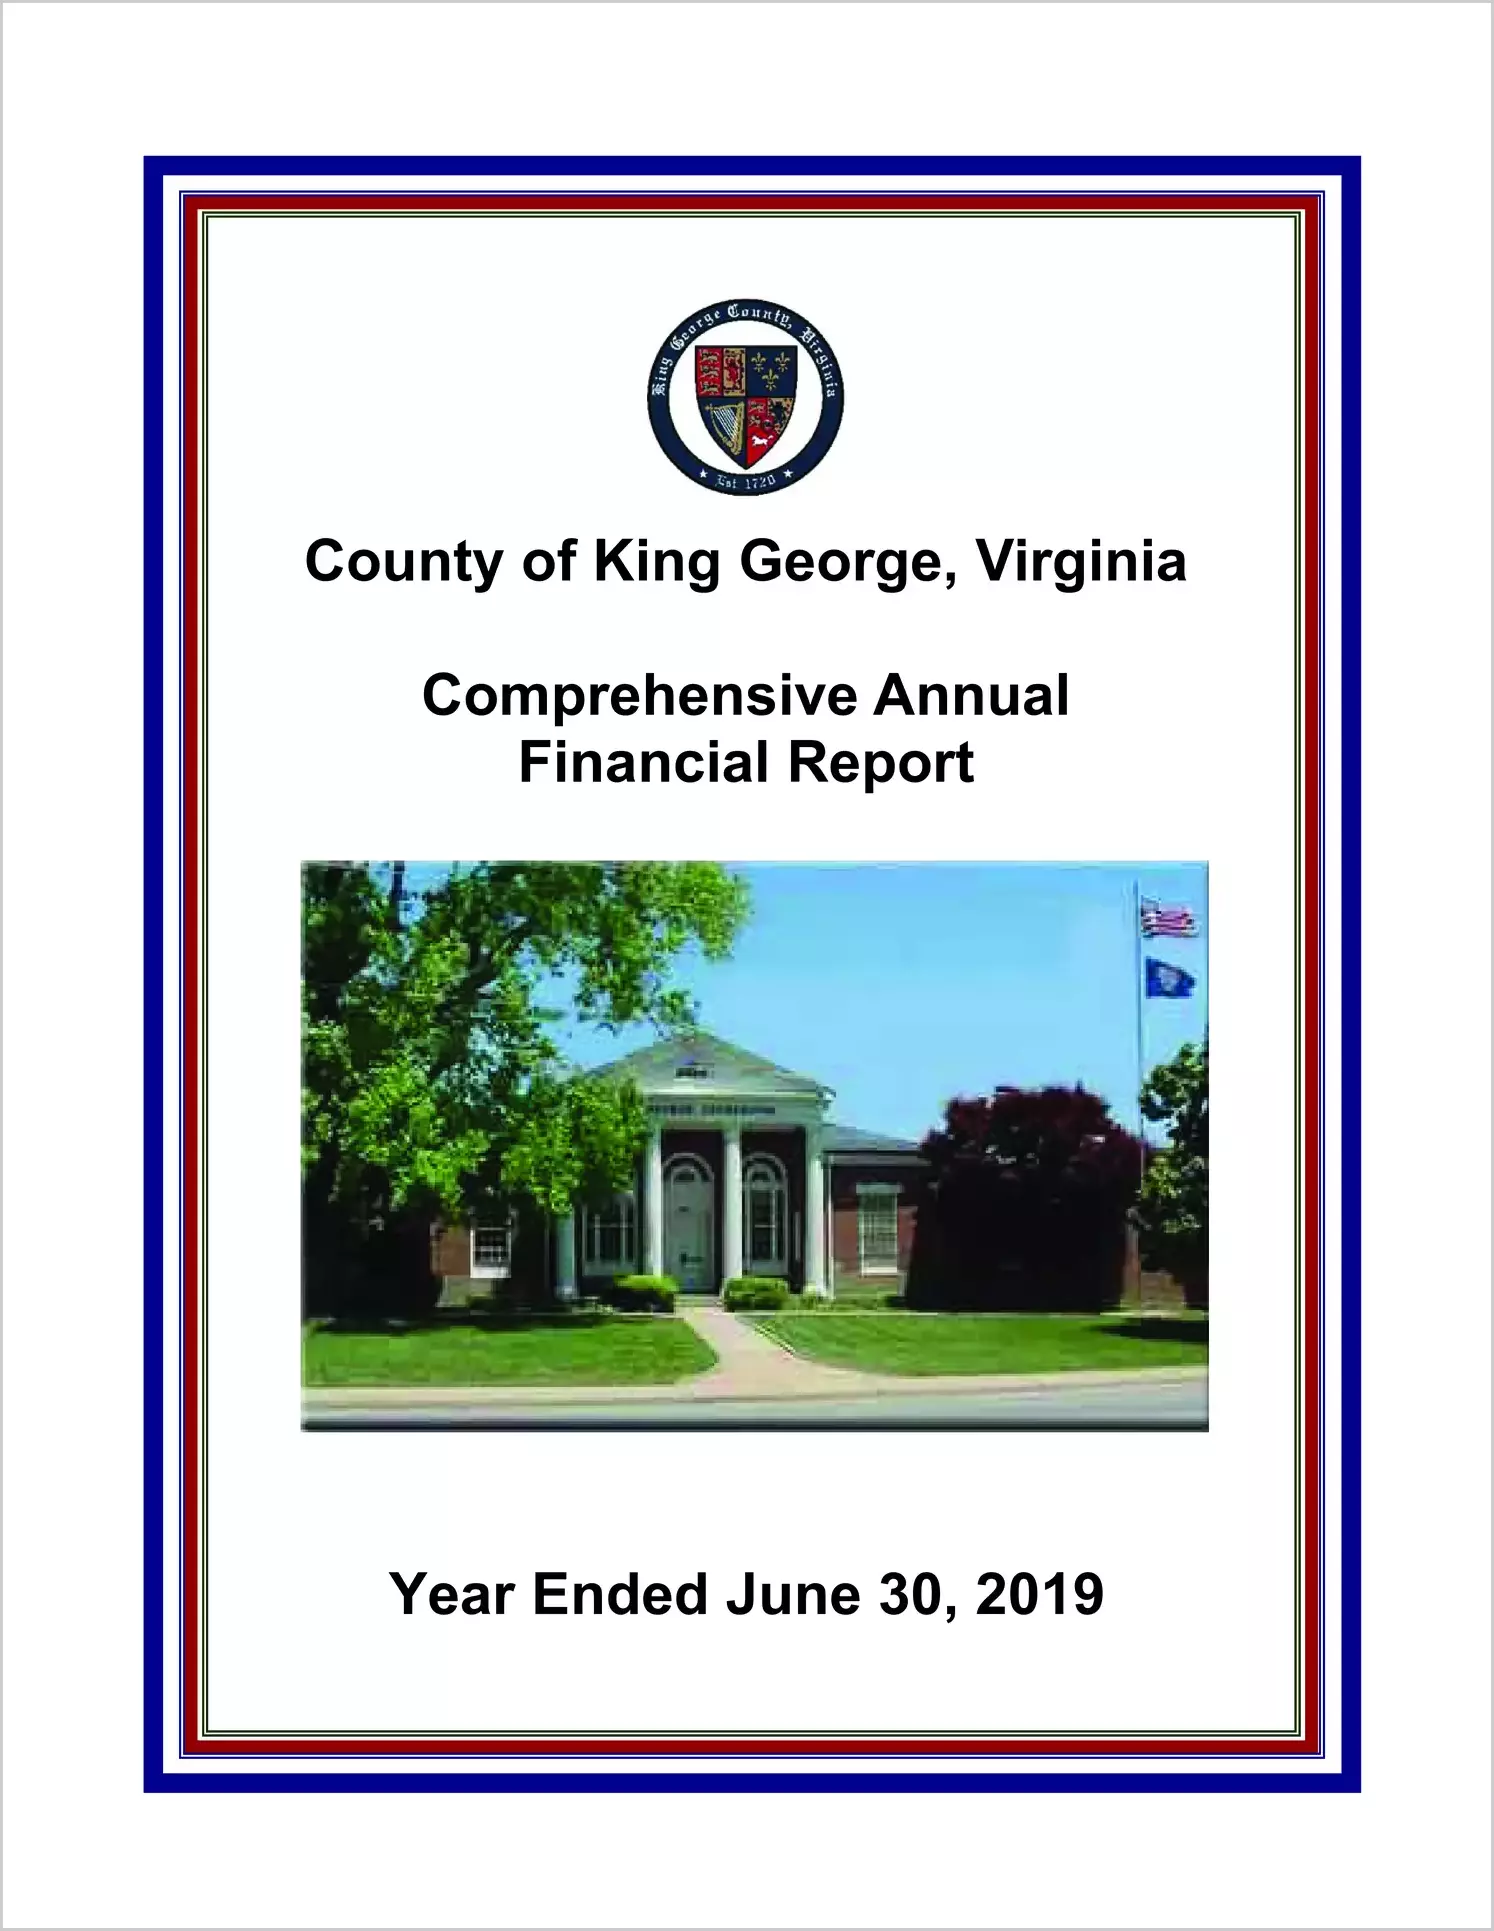 2019 Annual Financial Report for County of King George